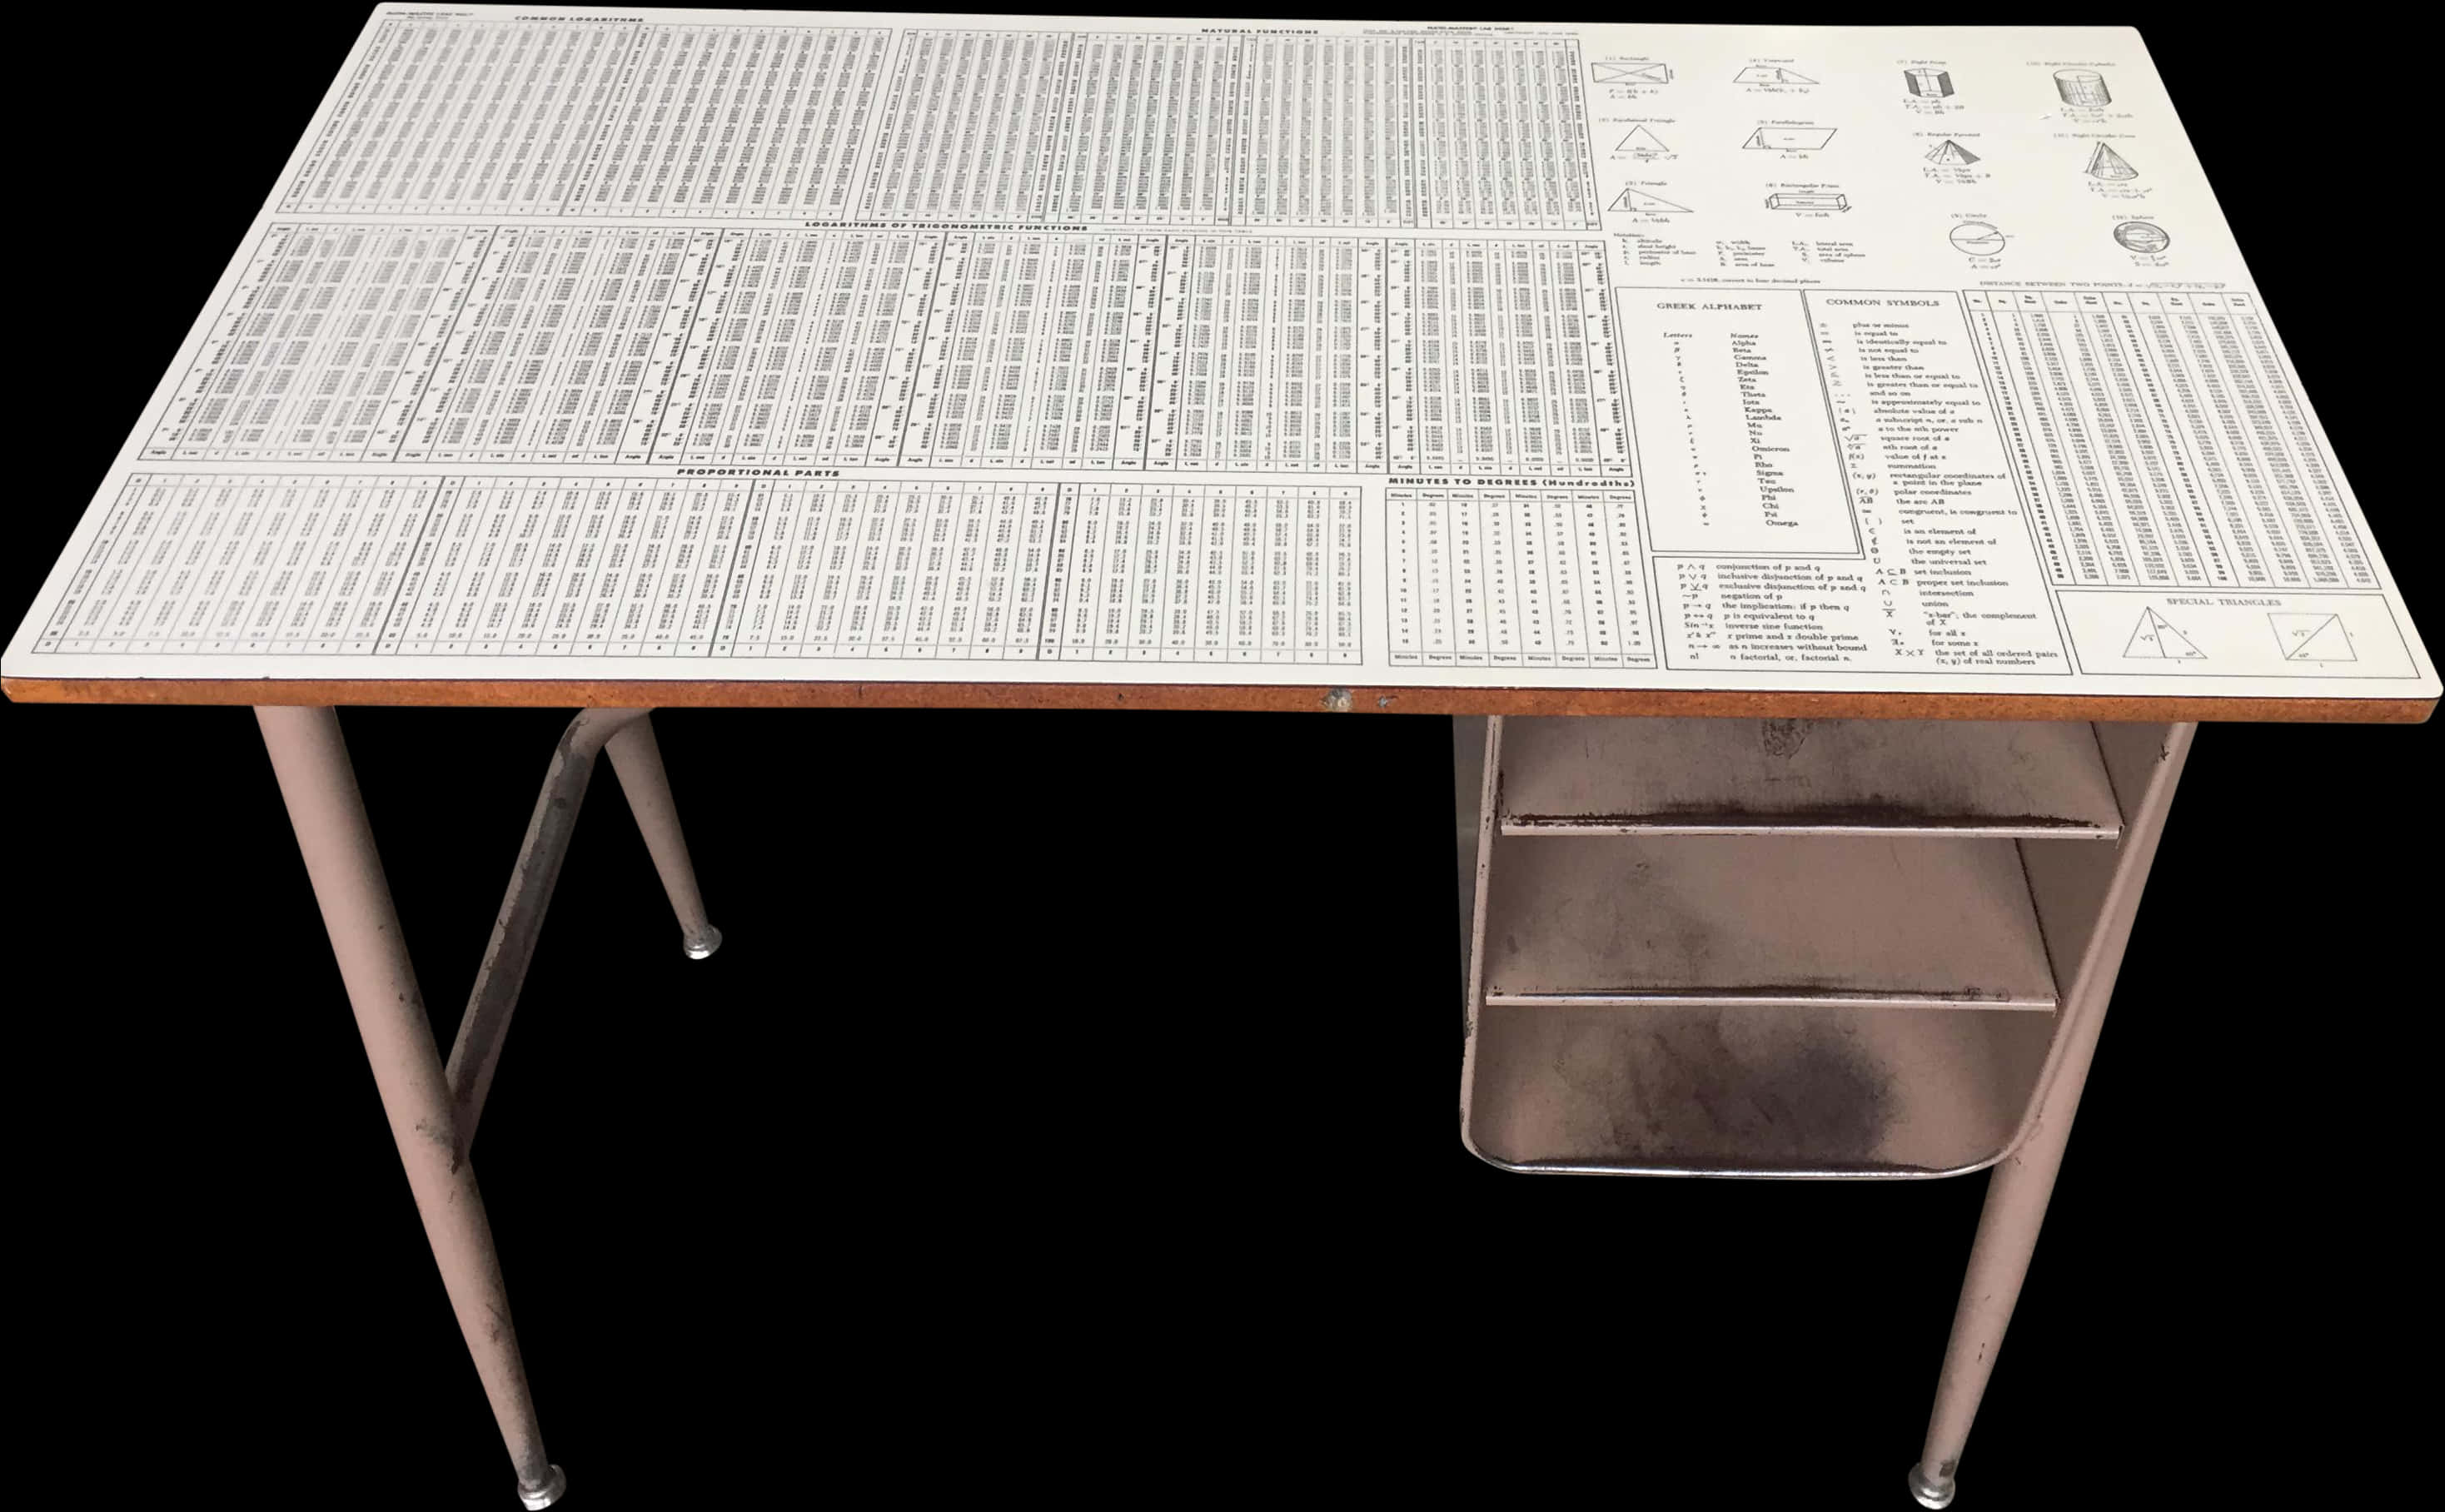 A Table With A Sheet Of Paper On It